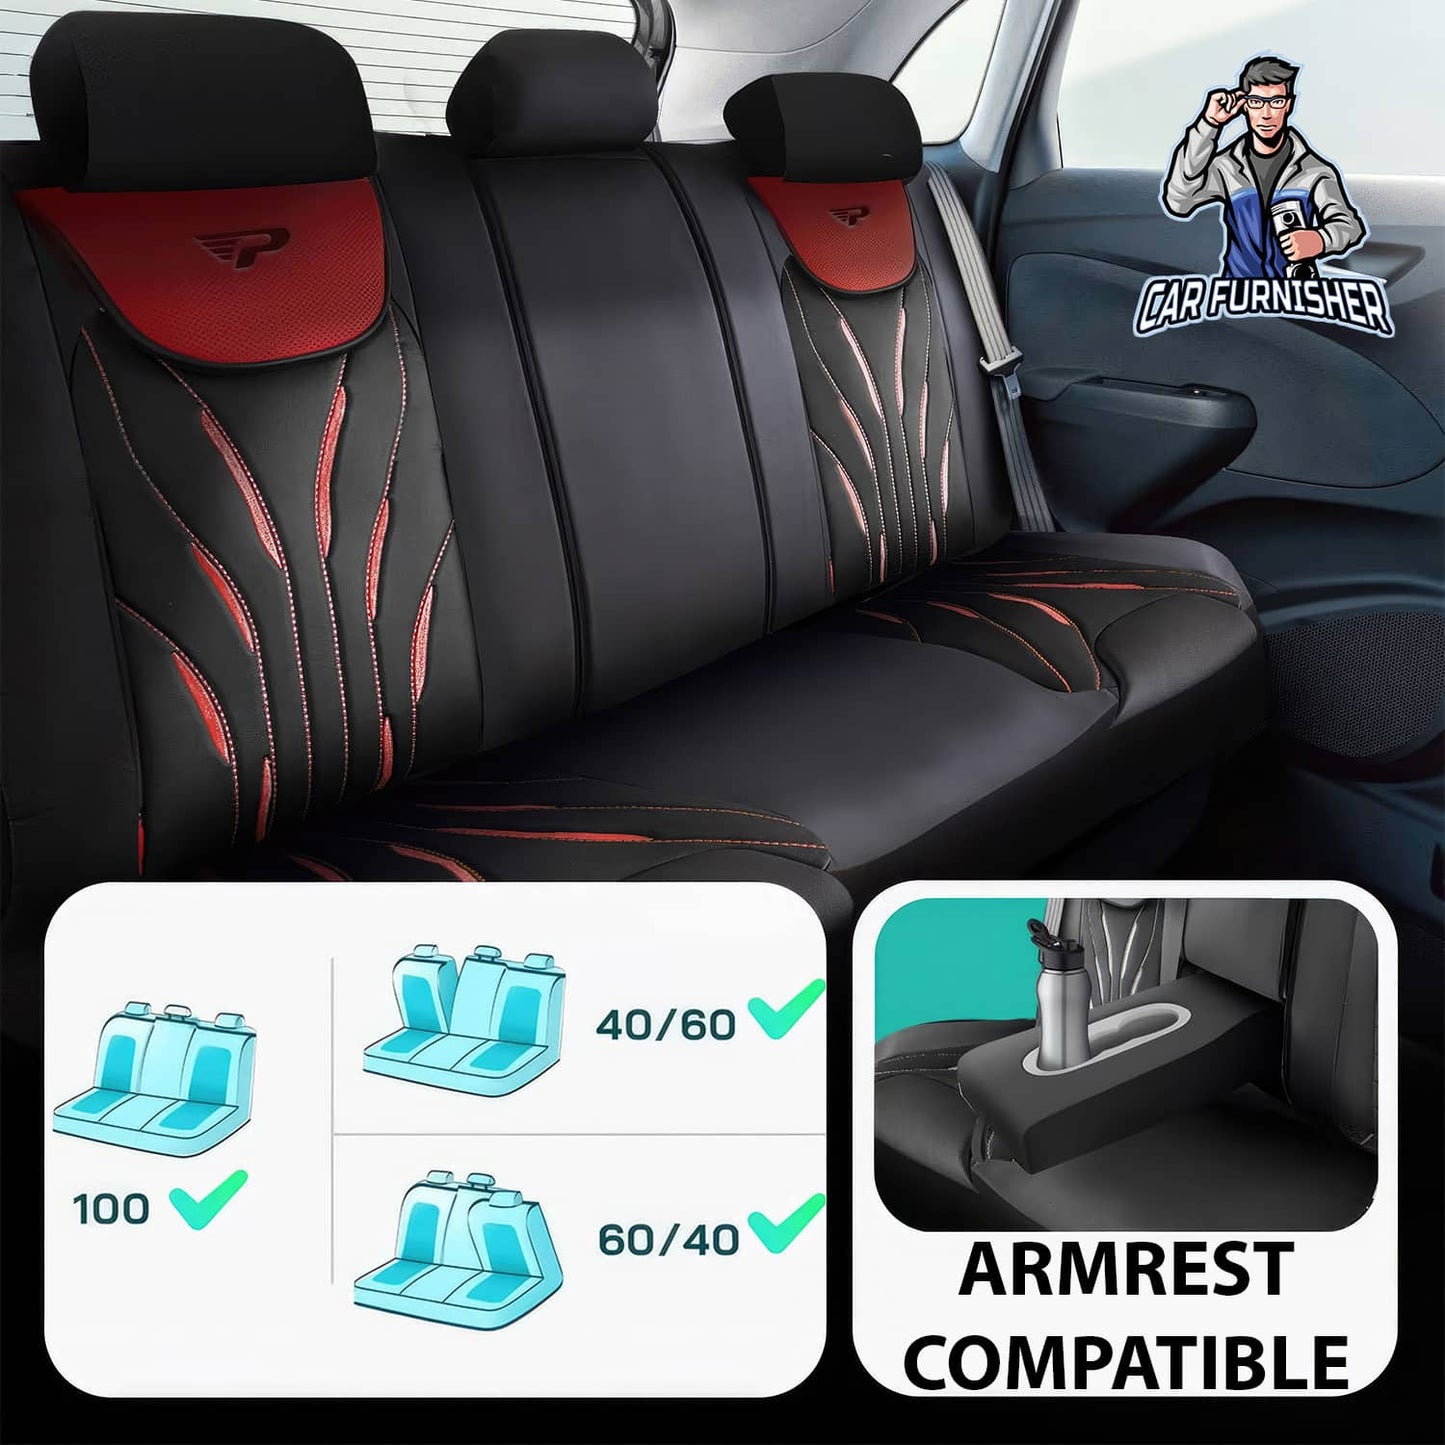 Car Seat Cover Set - Pars Design Red 5 Seats + Headrests (Full Set) Full Leather